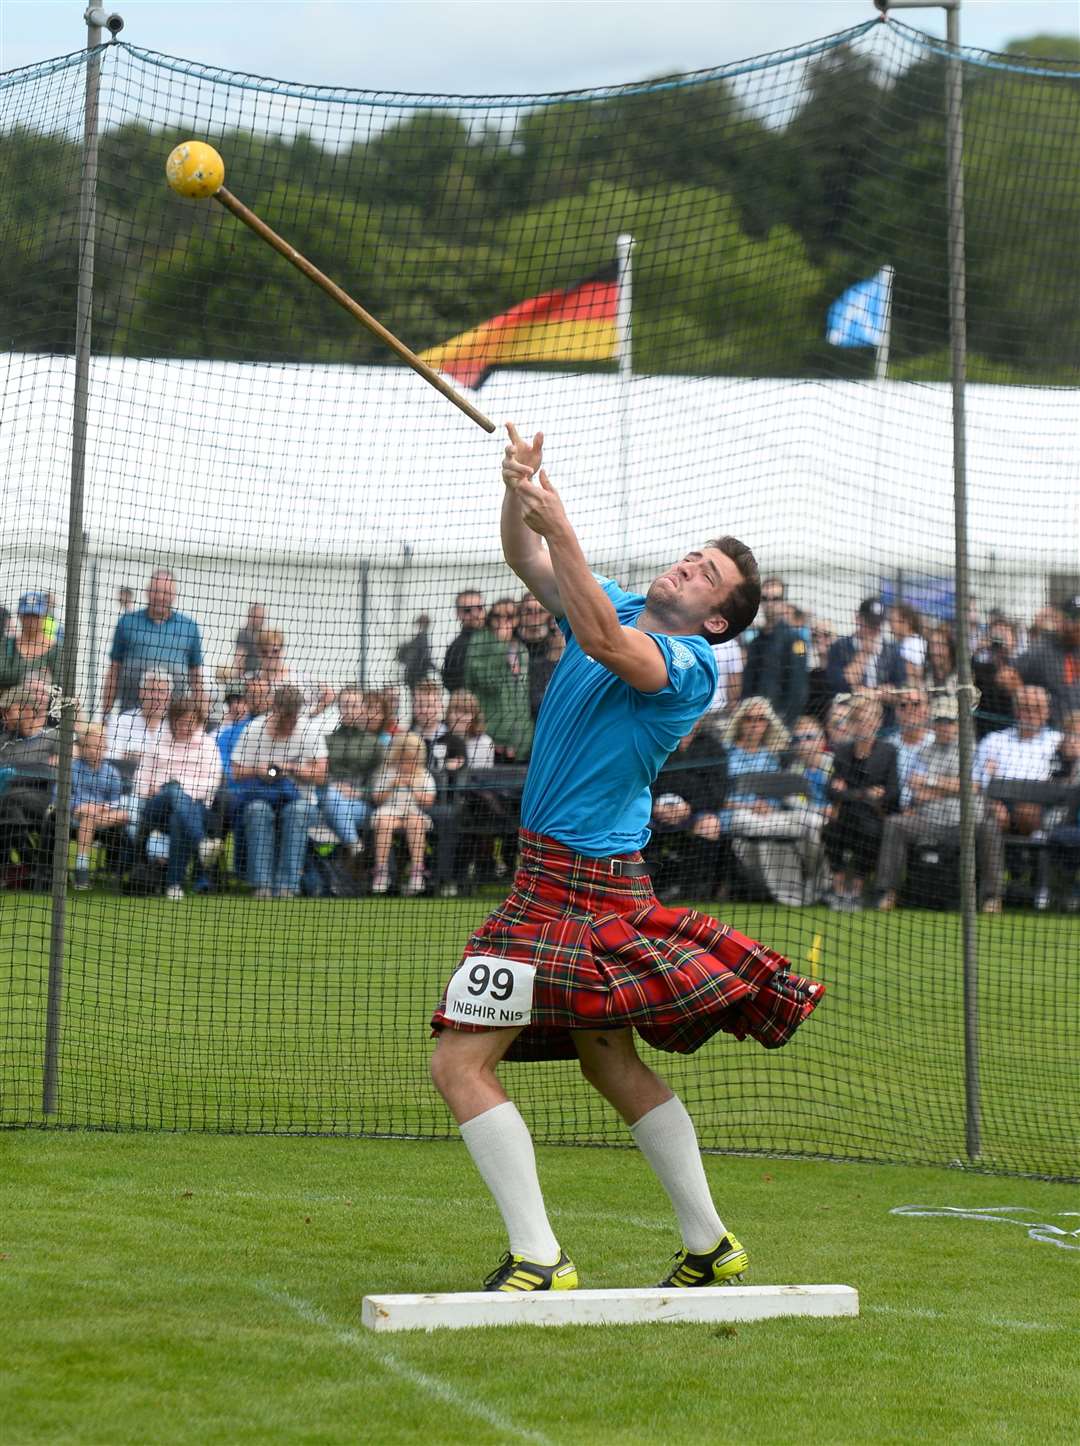 Highland Games events are always popular.